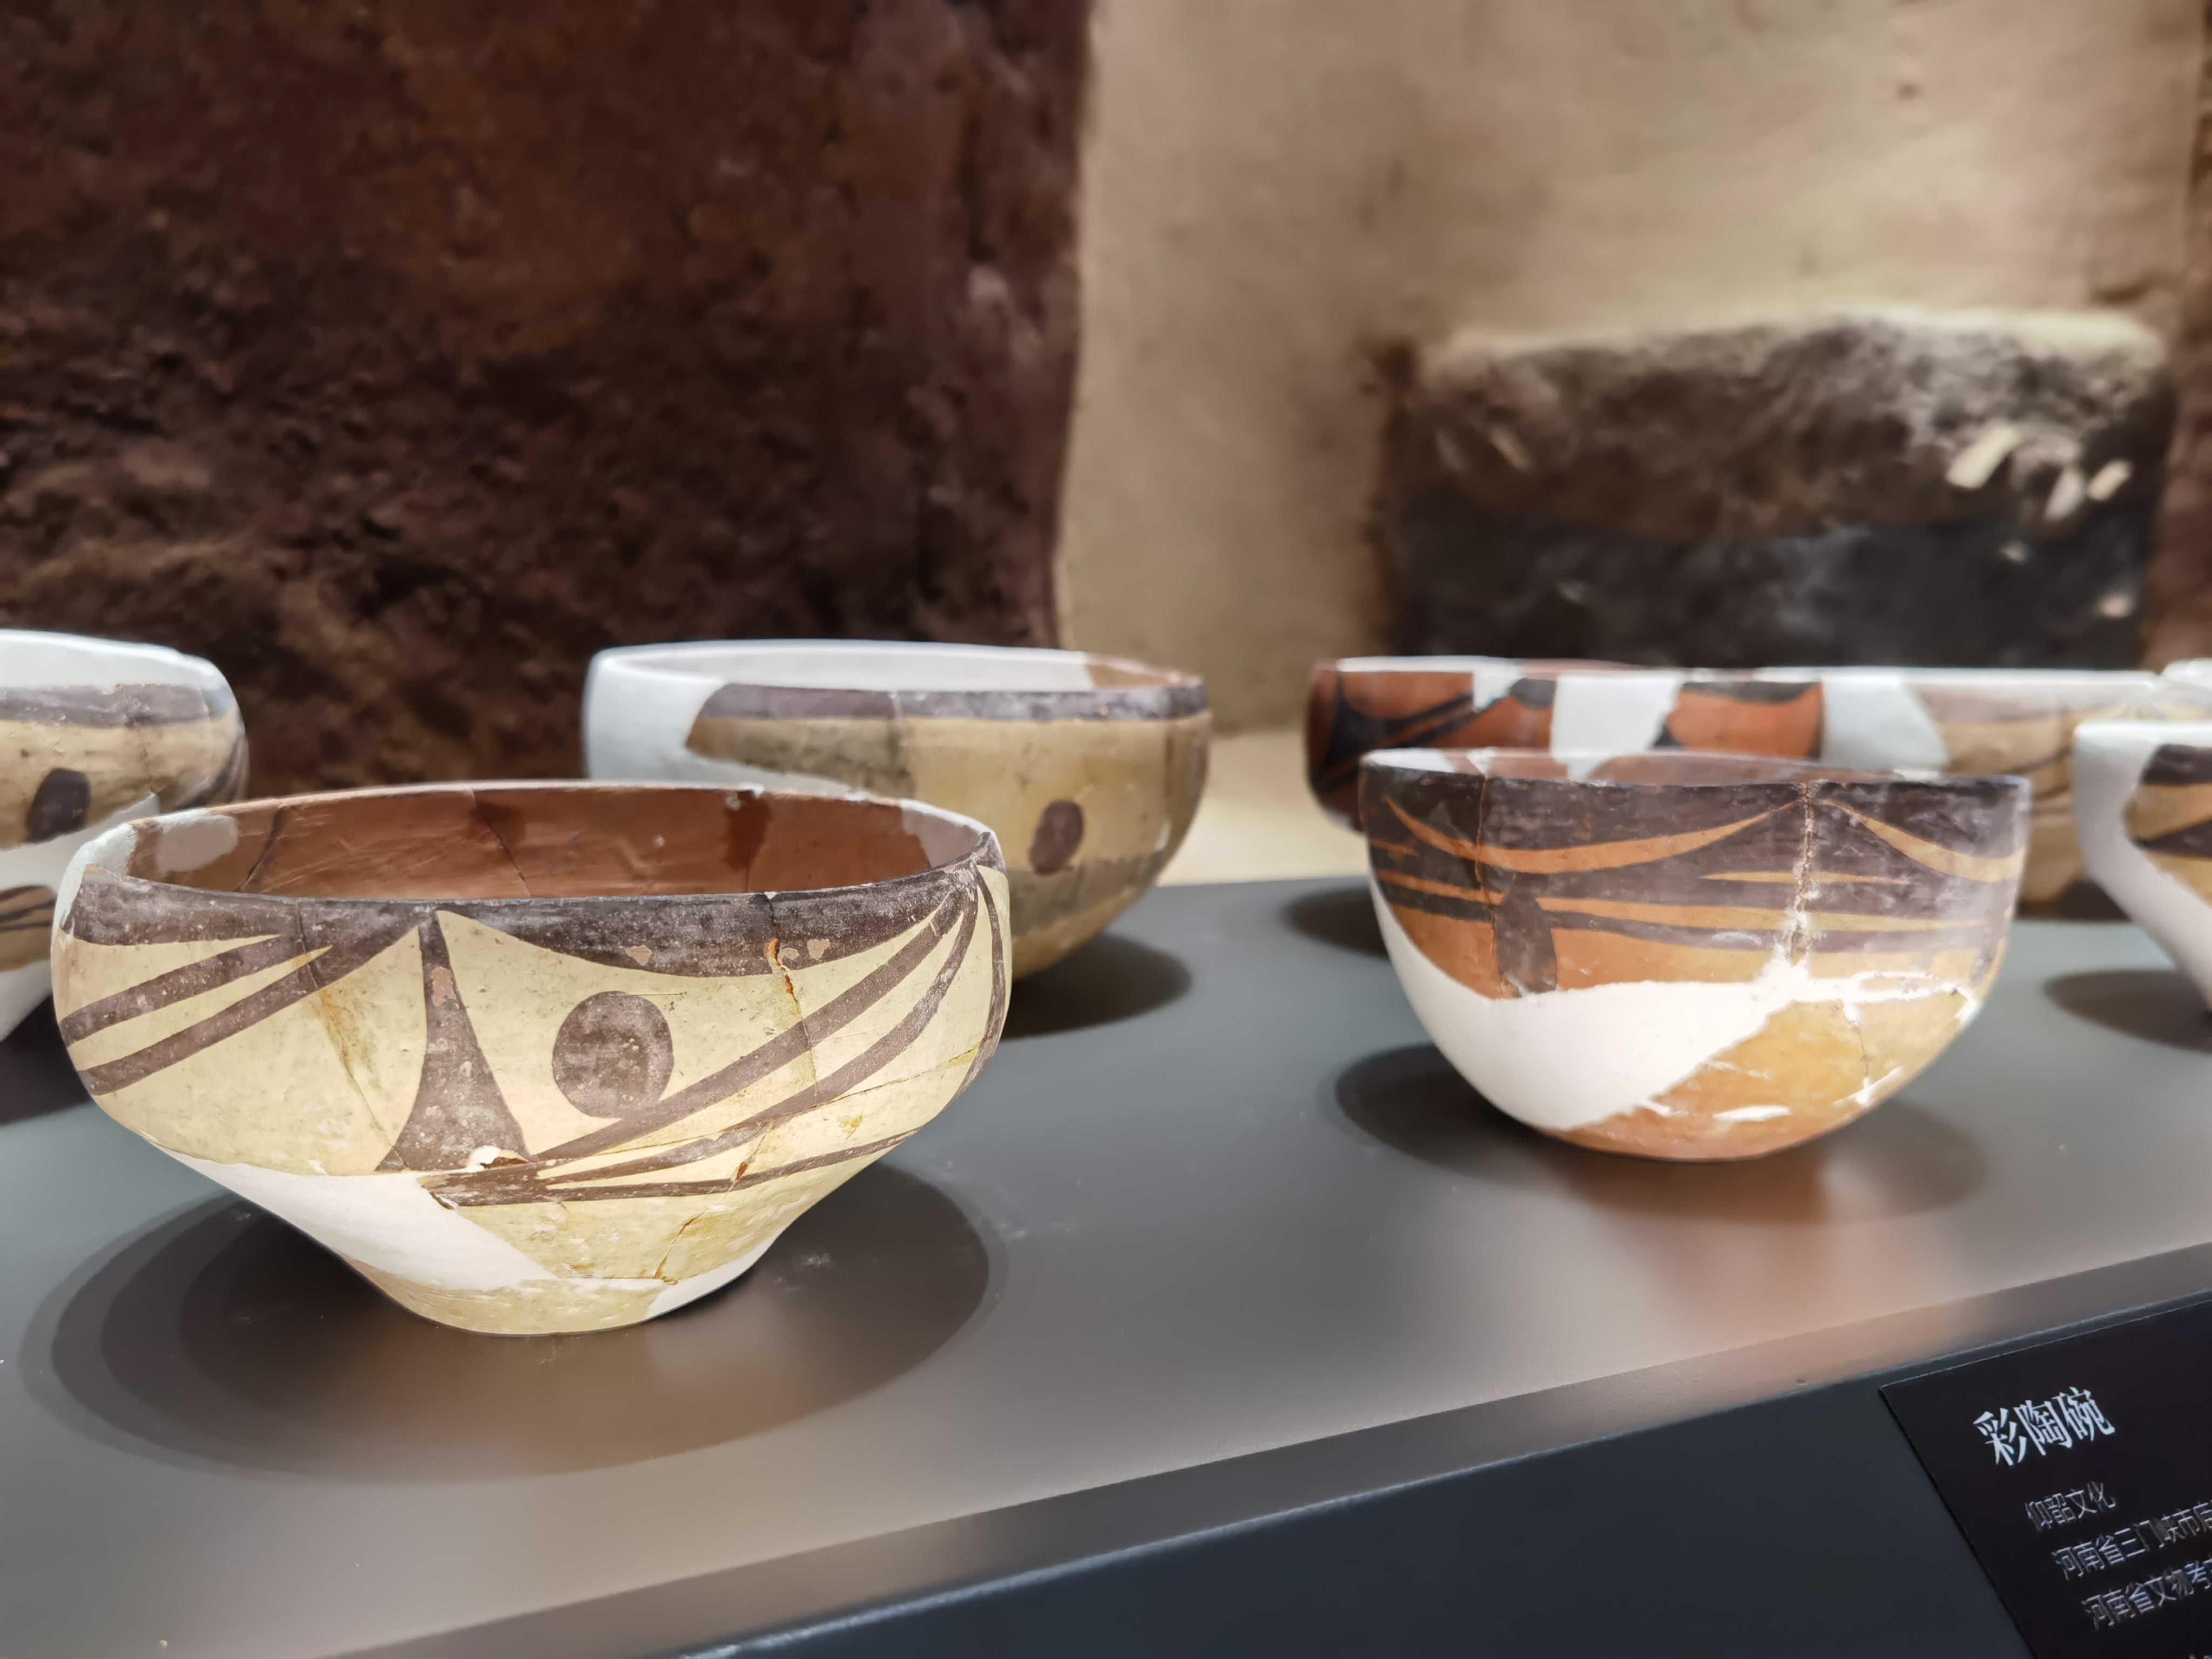 Painted pottery is displayed at the Miaodigou Yangshao Culture Museum in Sanmenxia, Henan province.